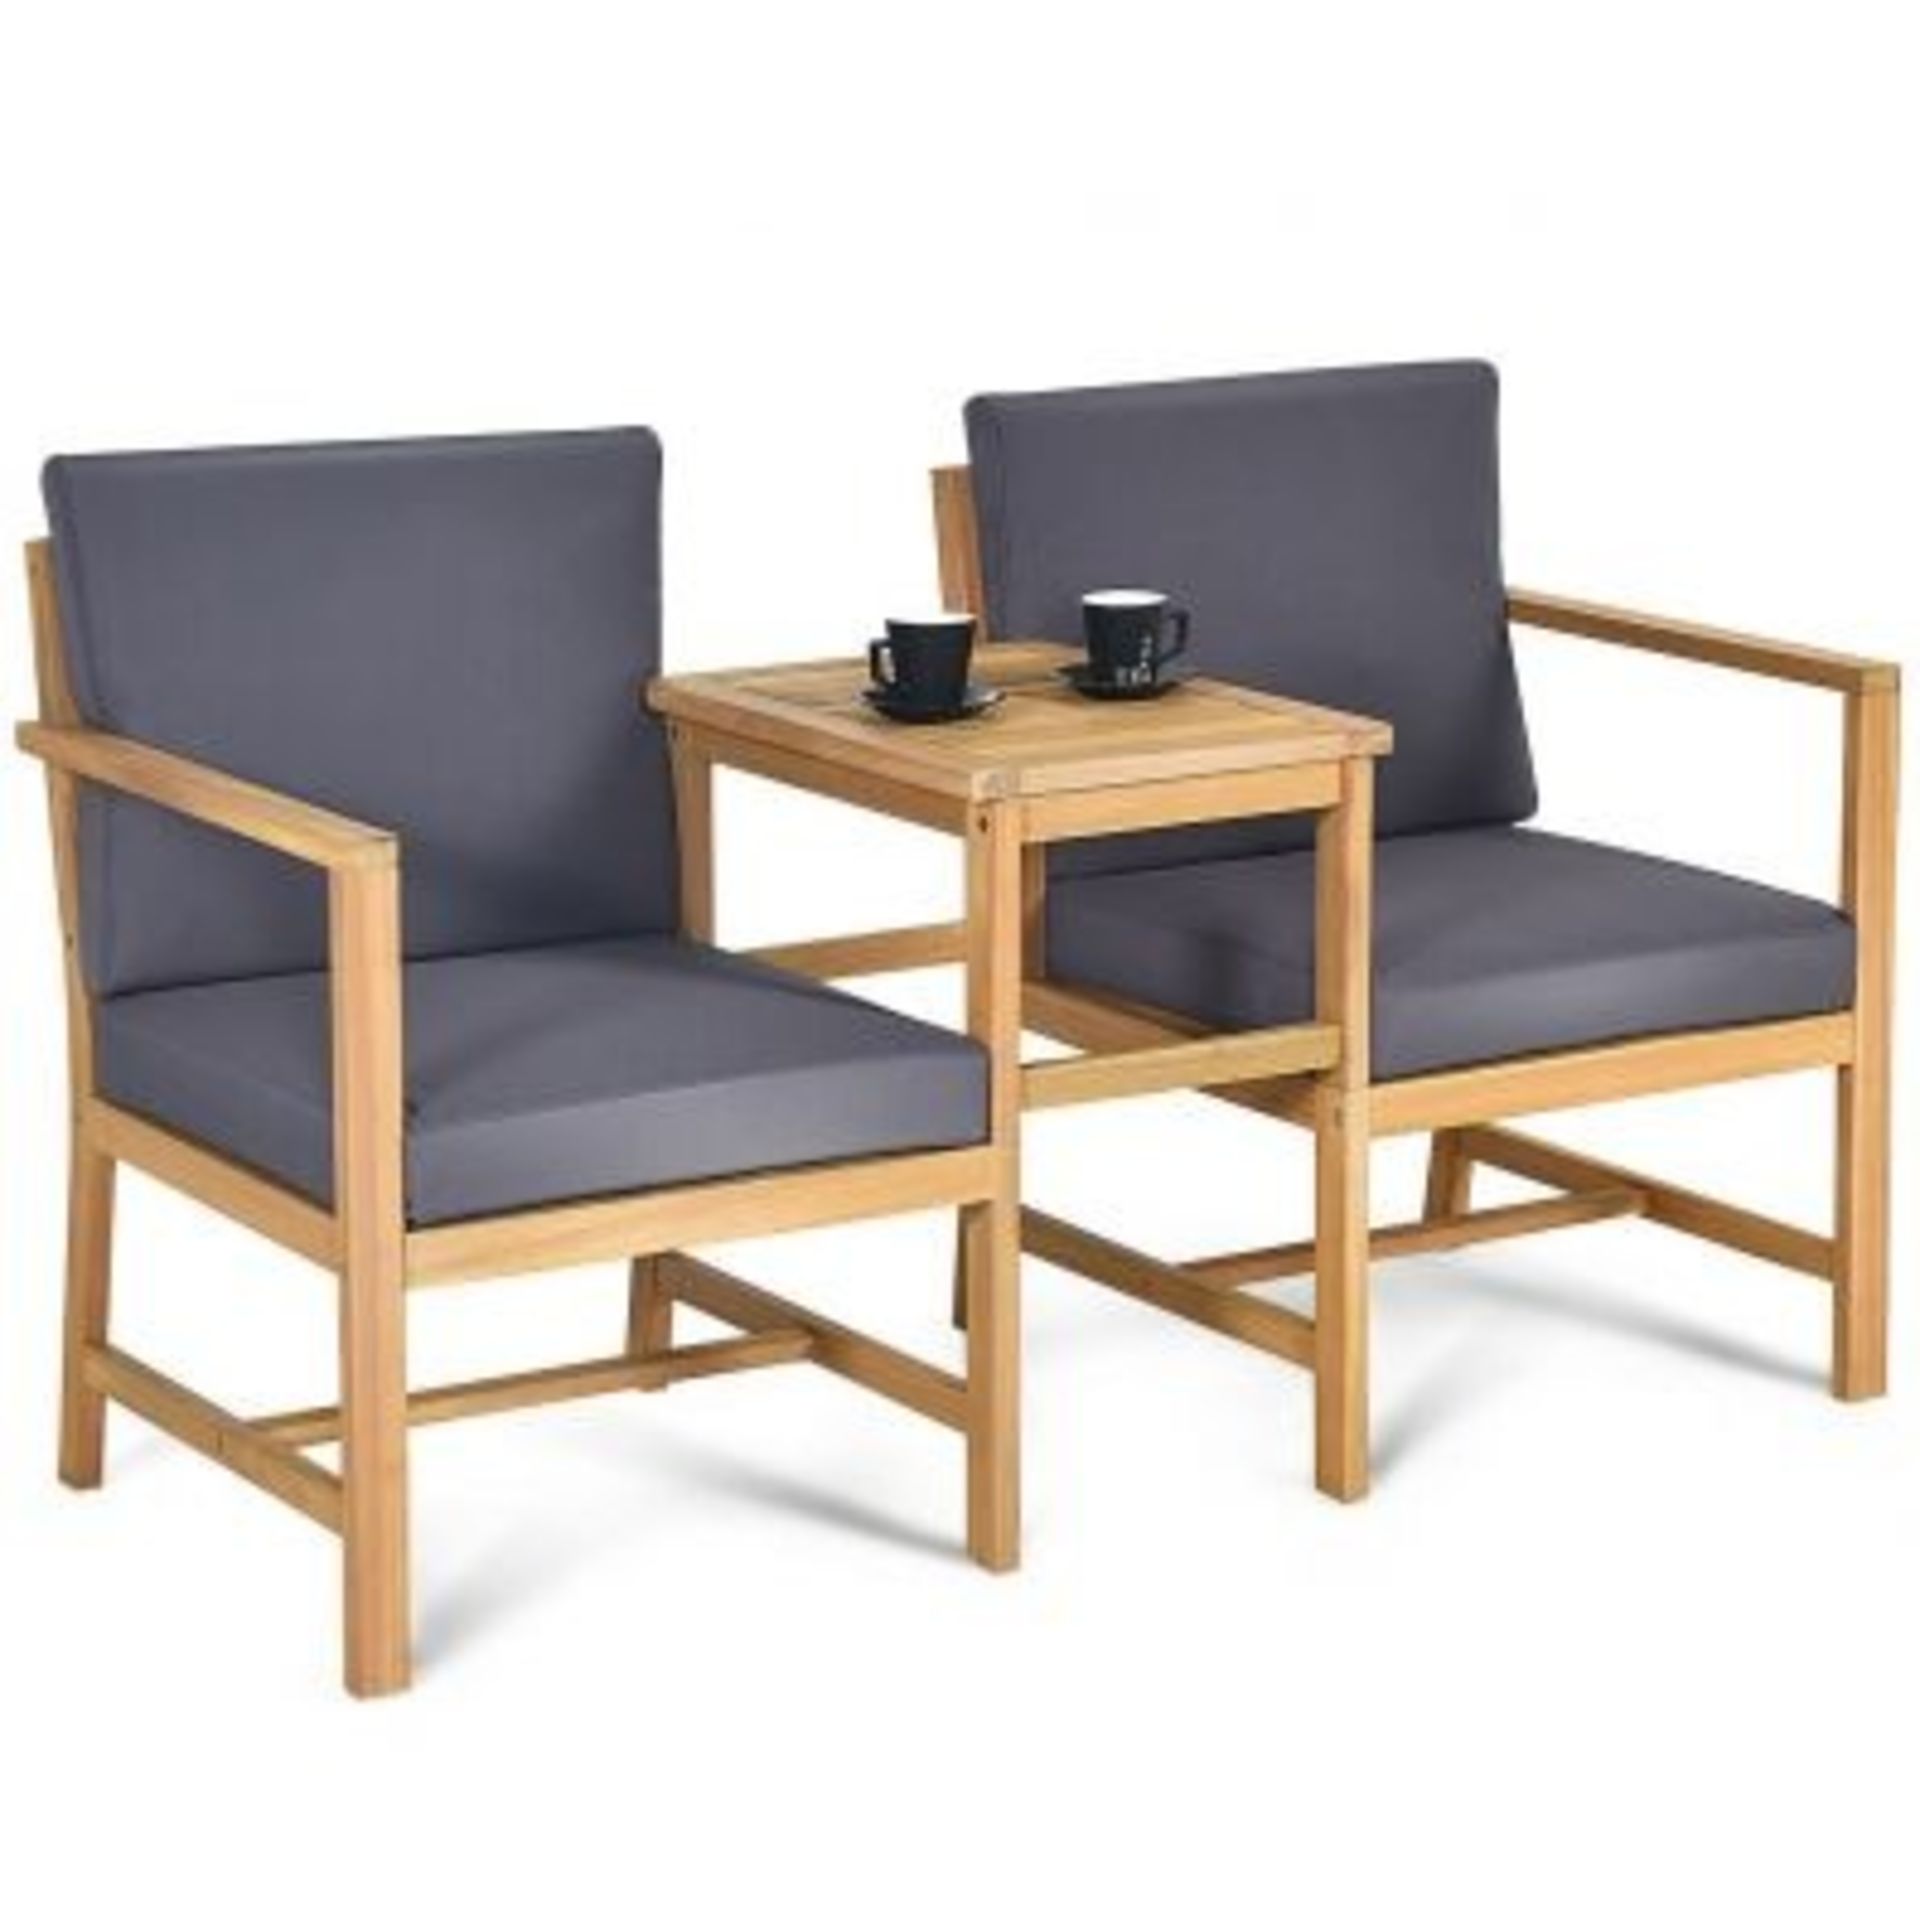 3 Piece Wooden Table and Chair Set - ER54